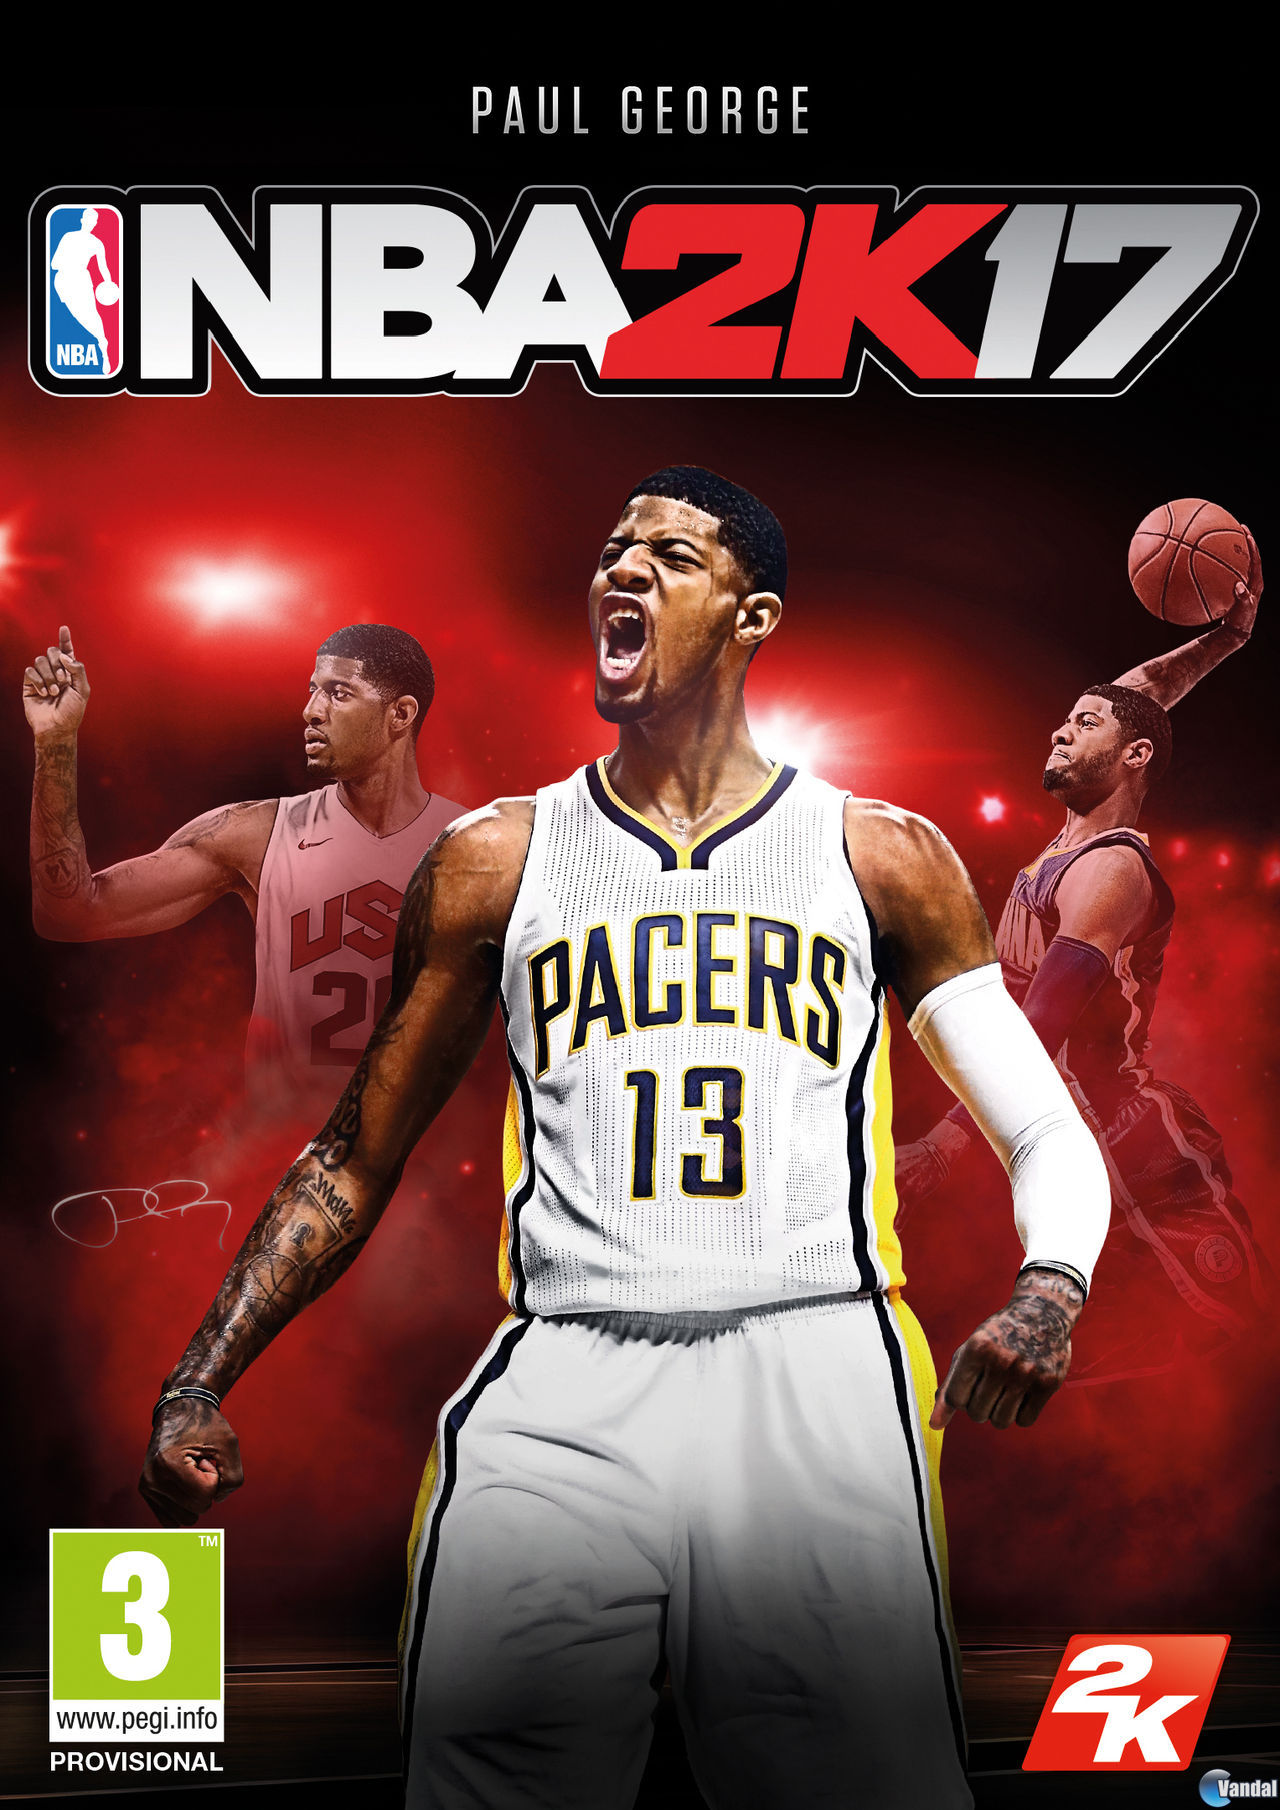 Nba 2k17 Videojuego Ps4 Pc Xbox 360 Ps3 Xbox One Android Y Iphone Vandal